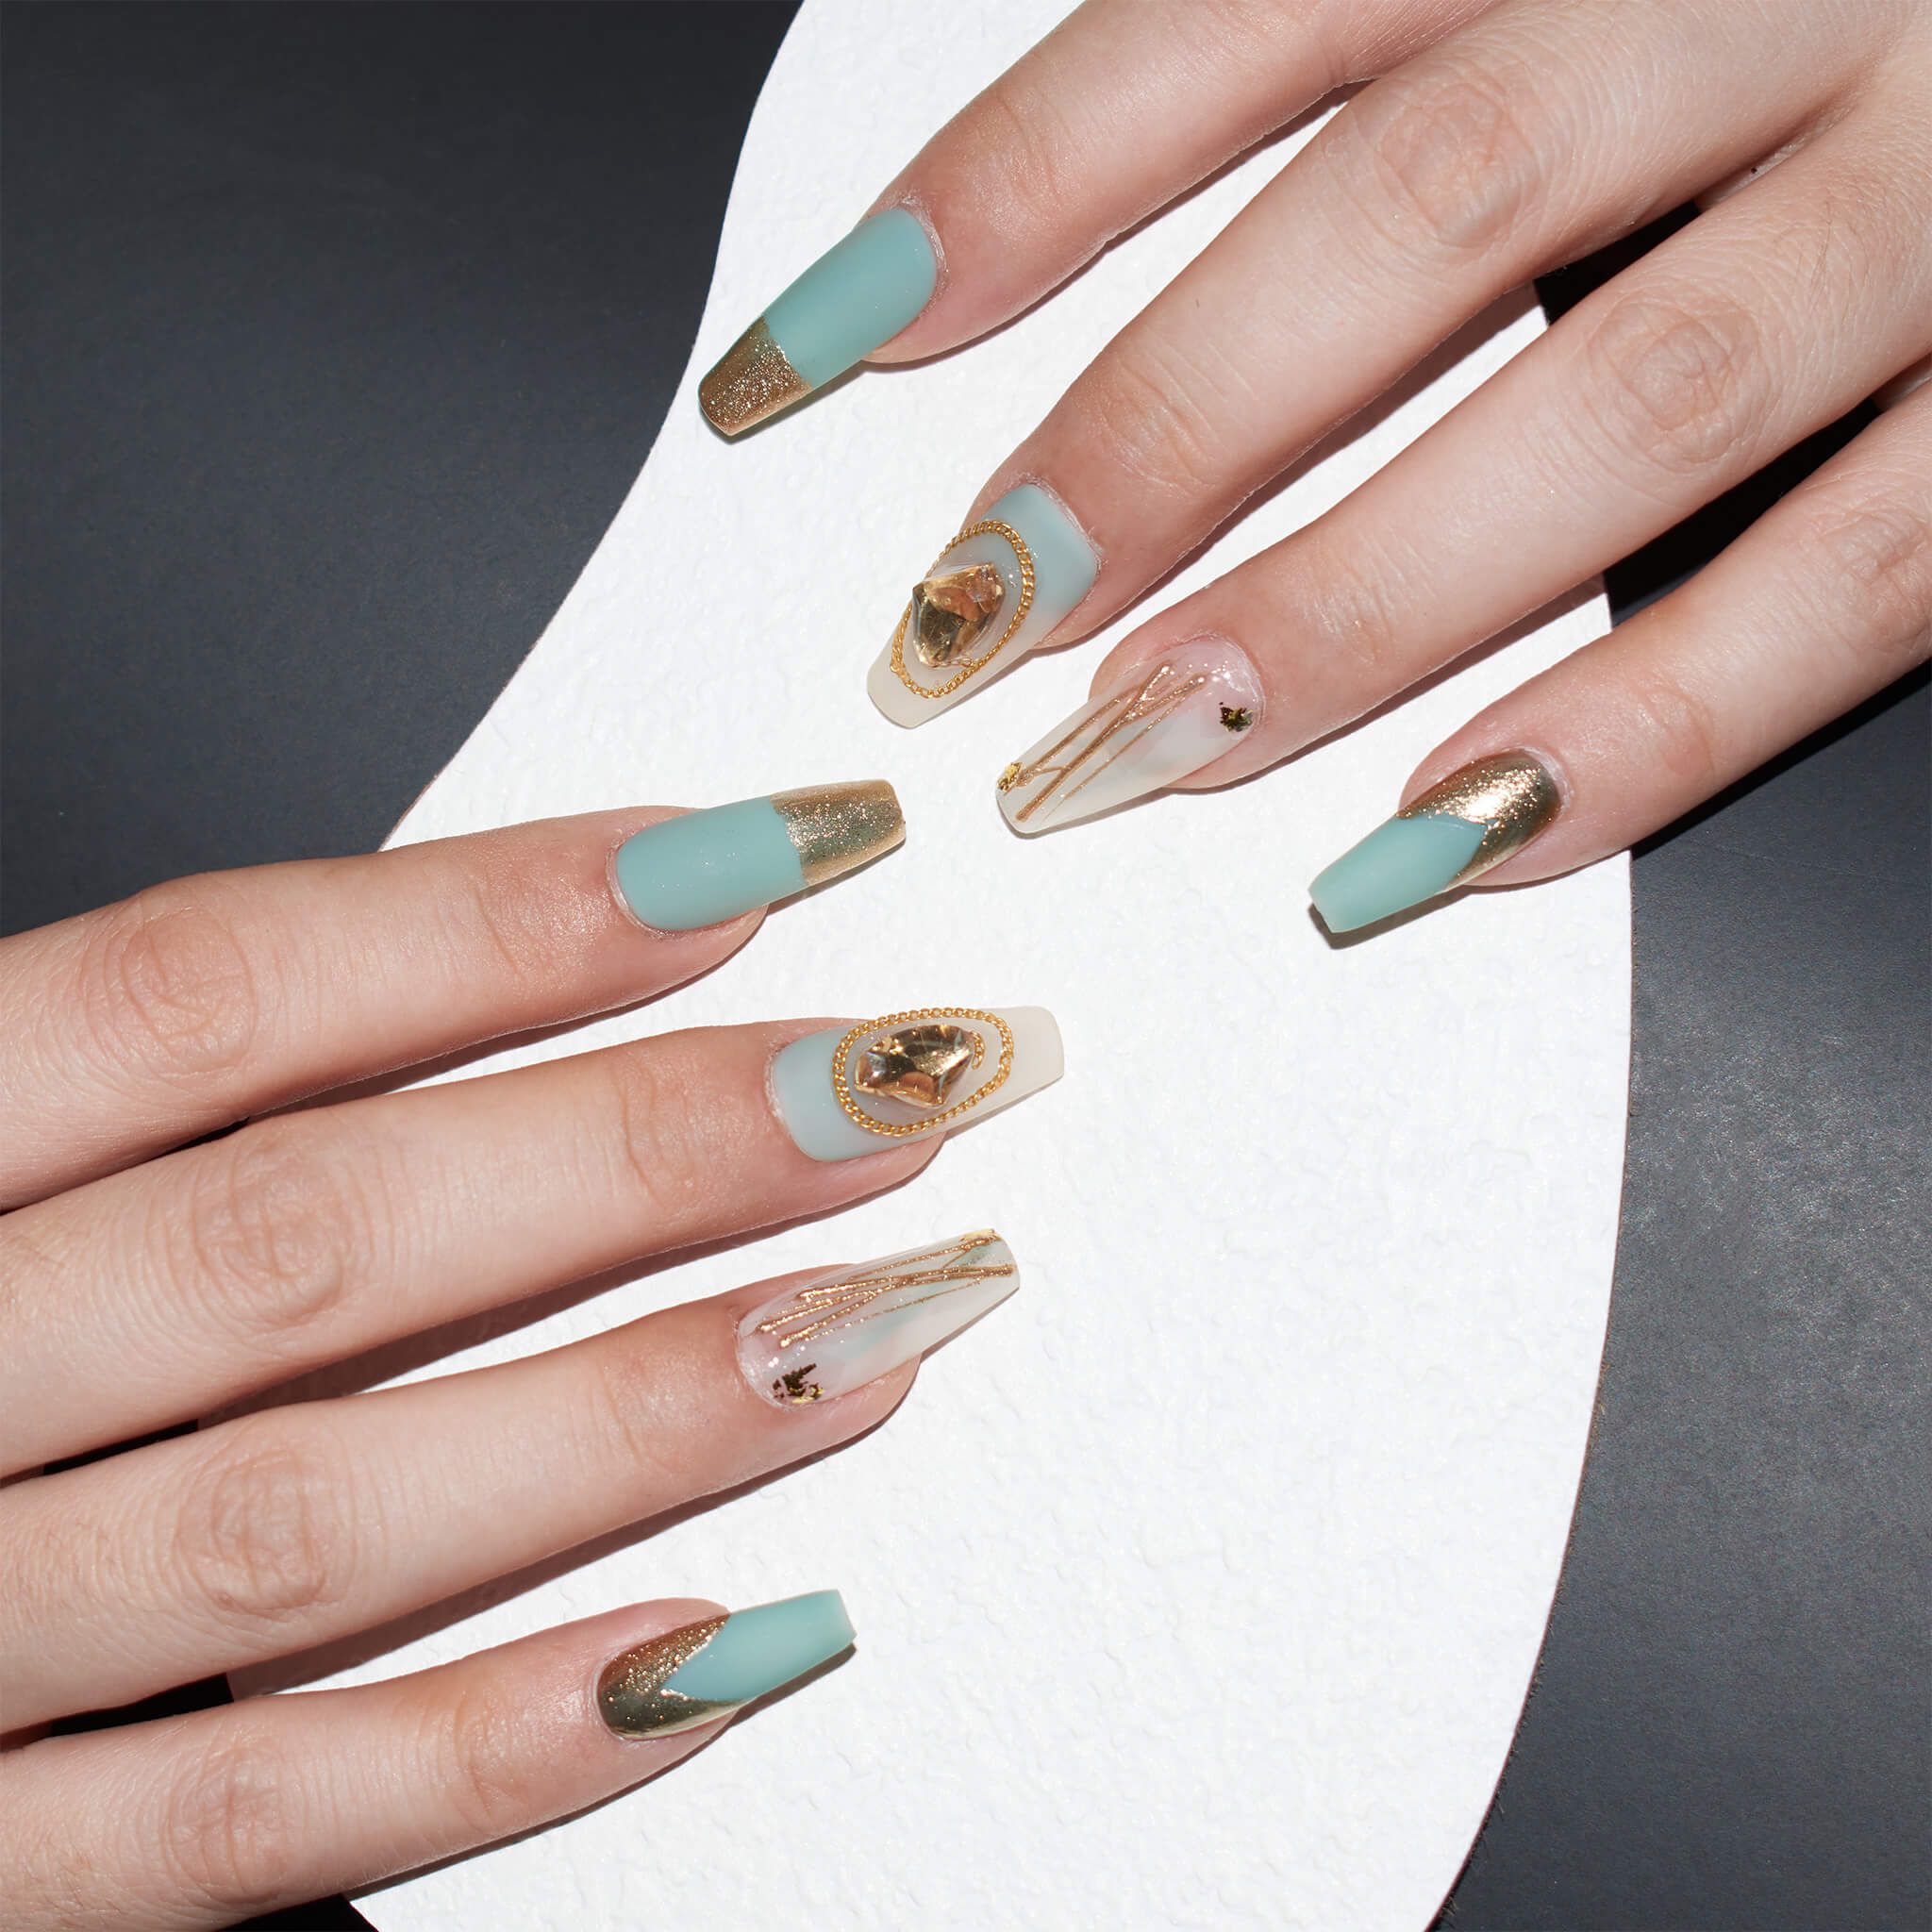 Hands with medium long, coffin-shaped press-on nails in matte aqua blue and glossy beige with gold accents, including glitter and geode patterns, against a black and white background.